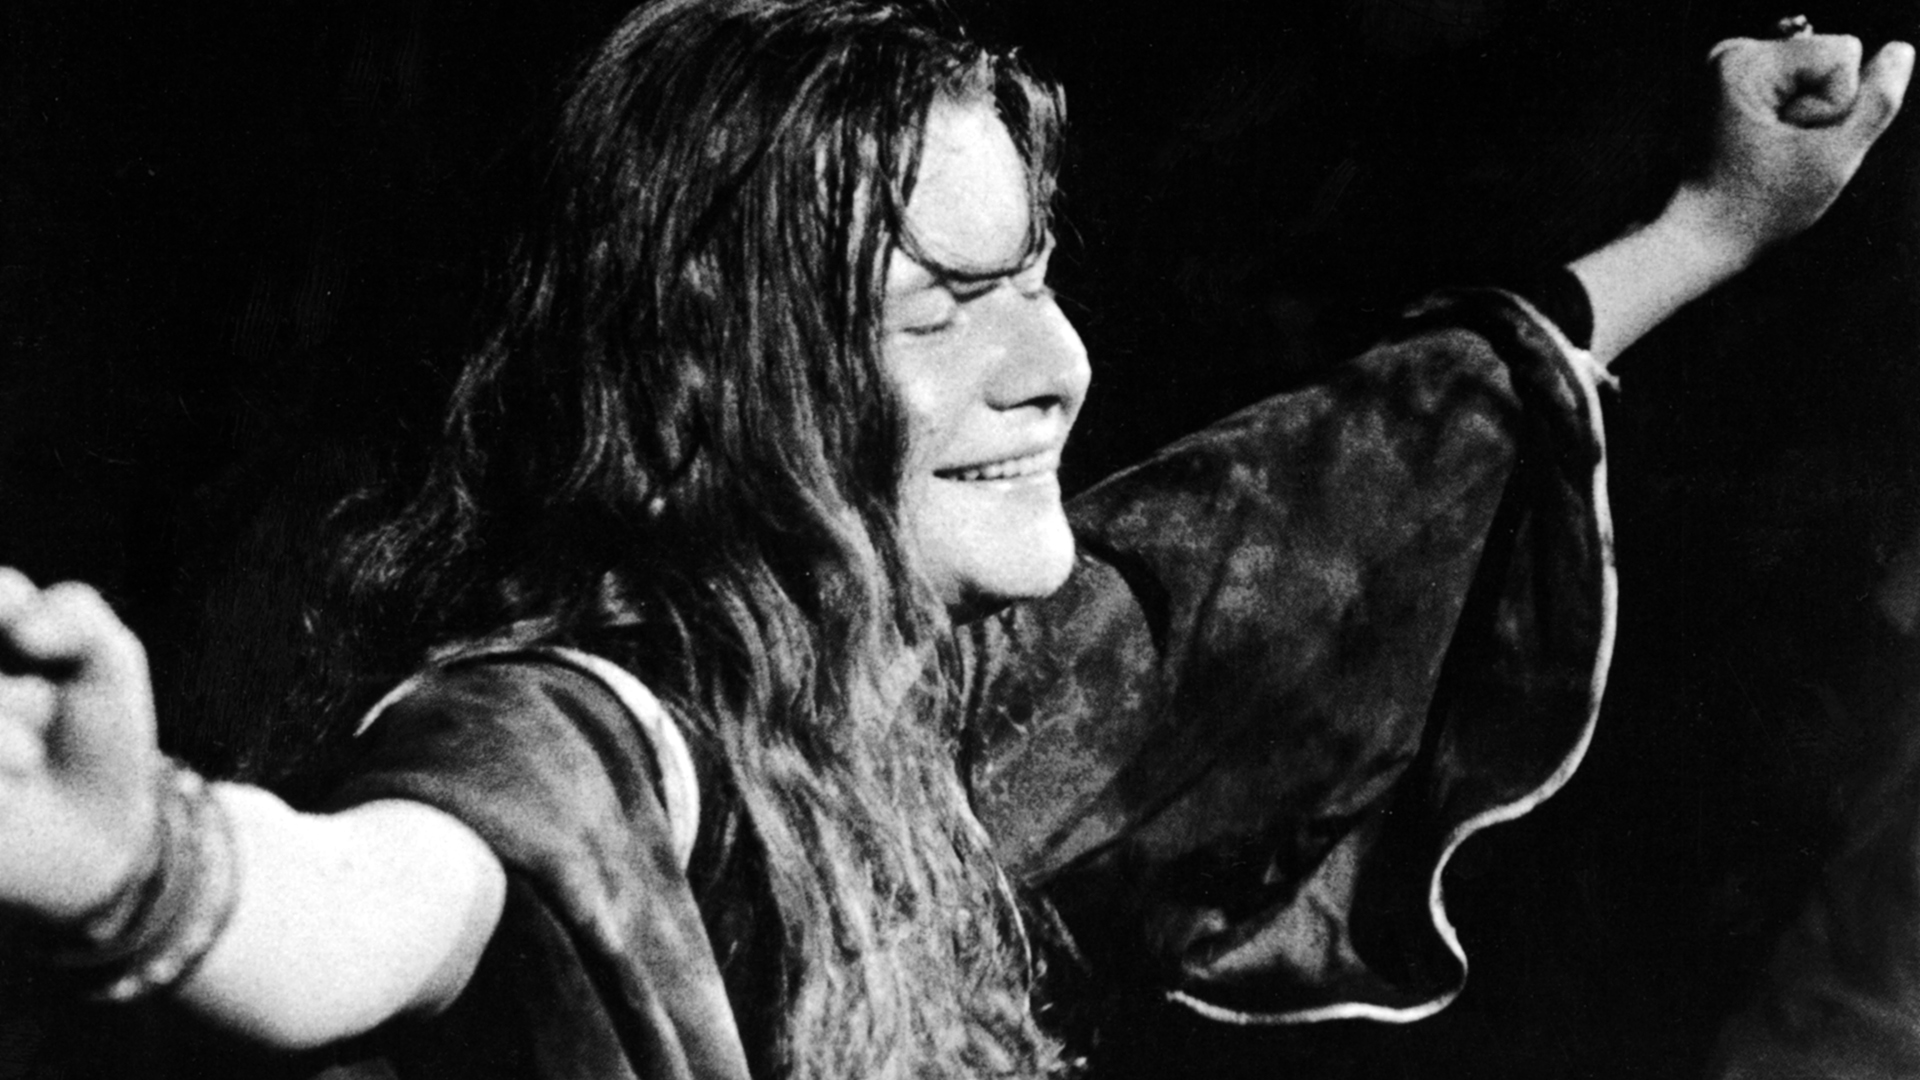 Janis Reaches Out